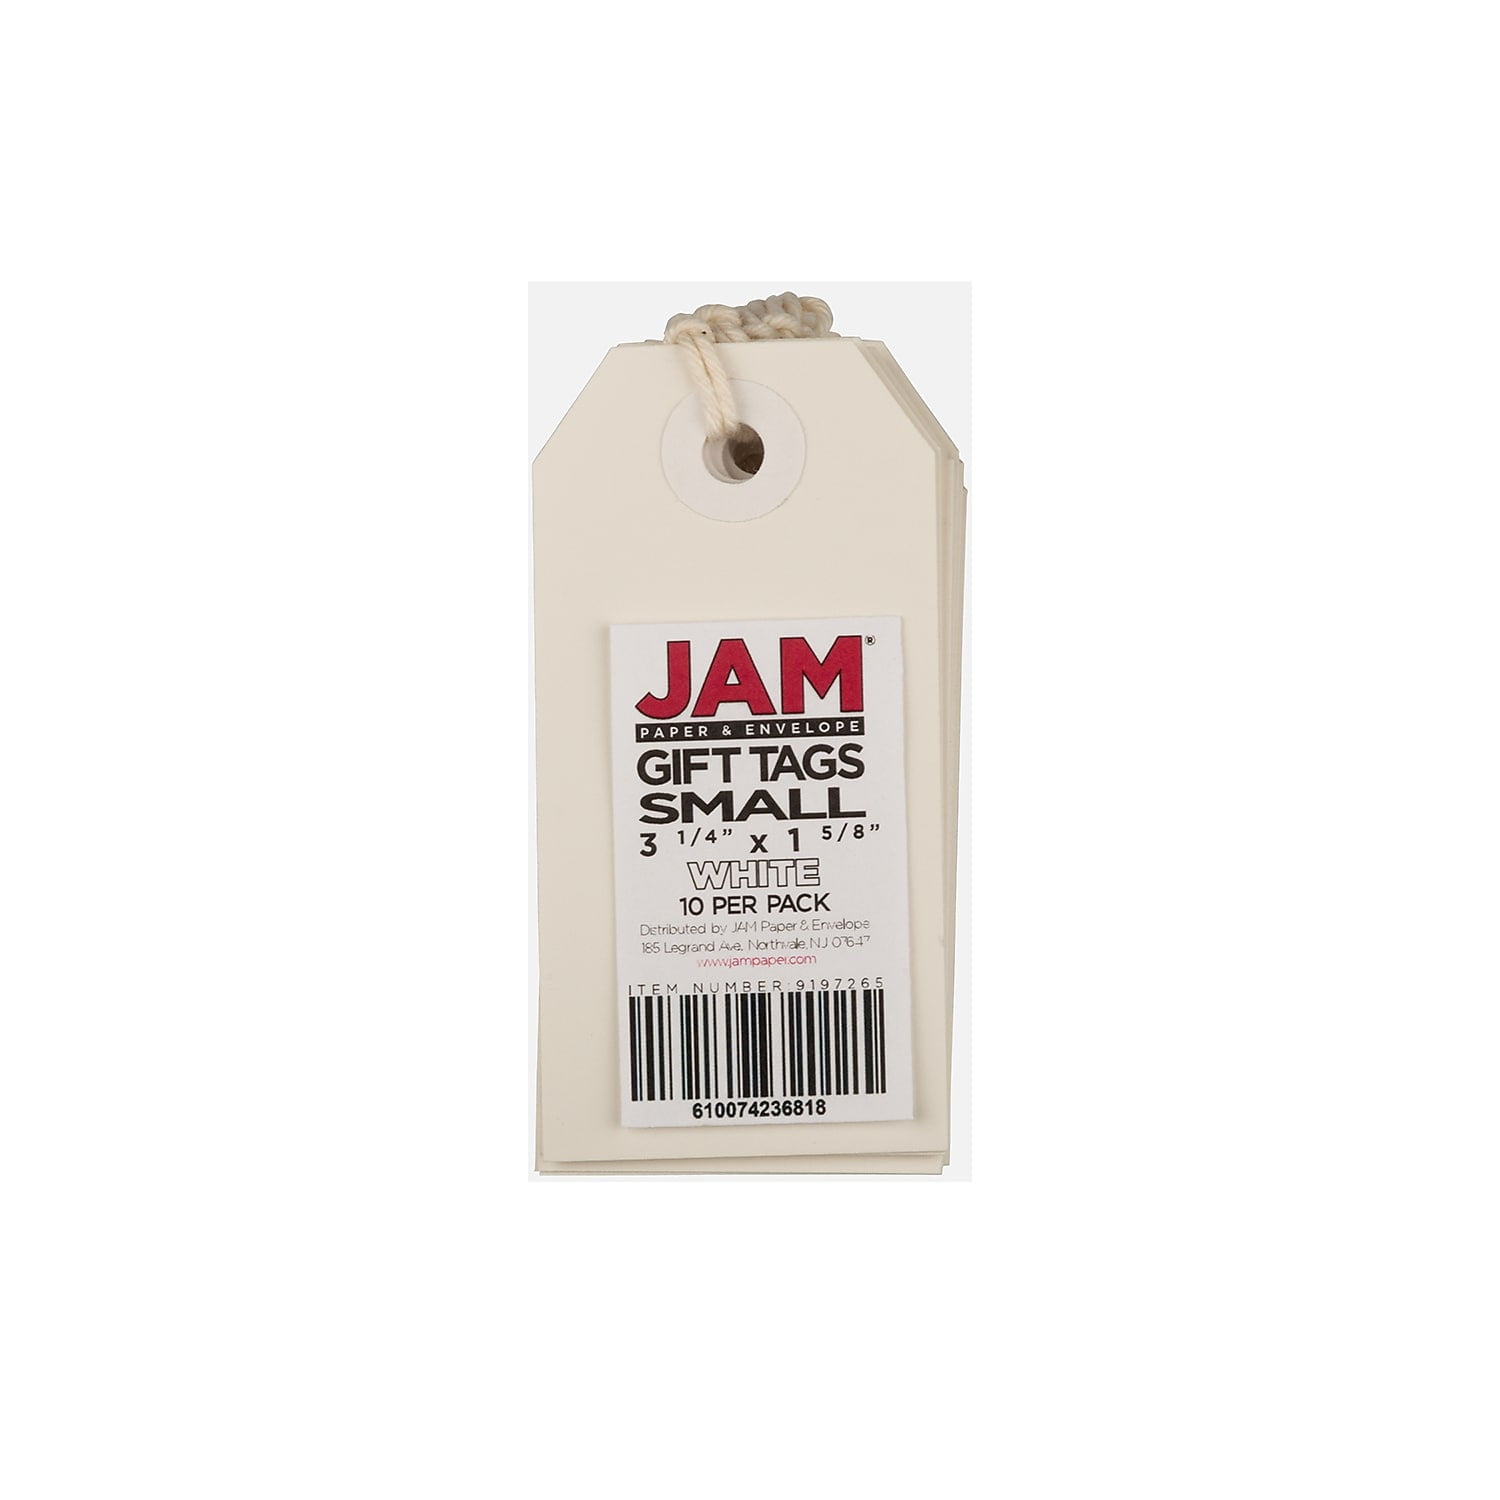  JAM PAPER Gift Tags with String - Medium - 4 3/4 x 2 3